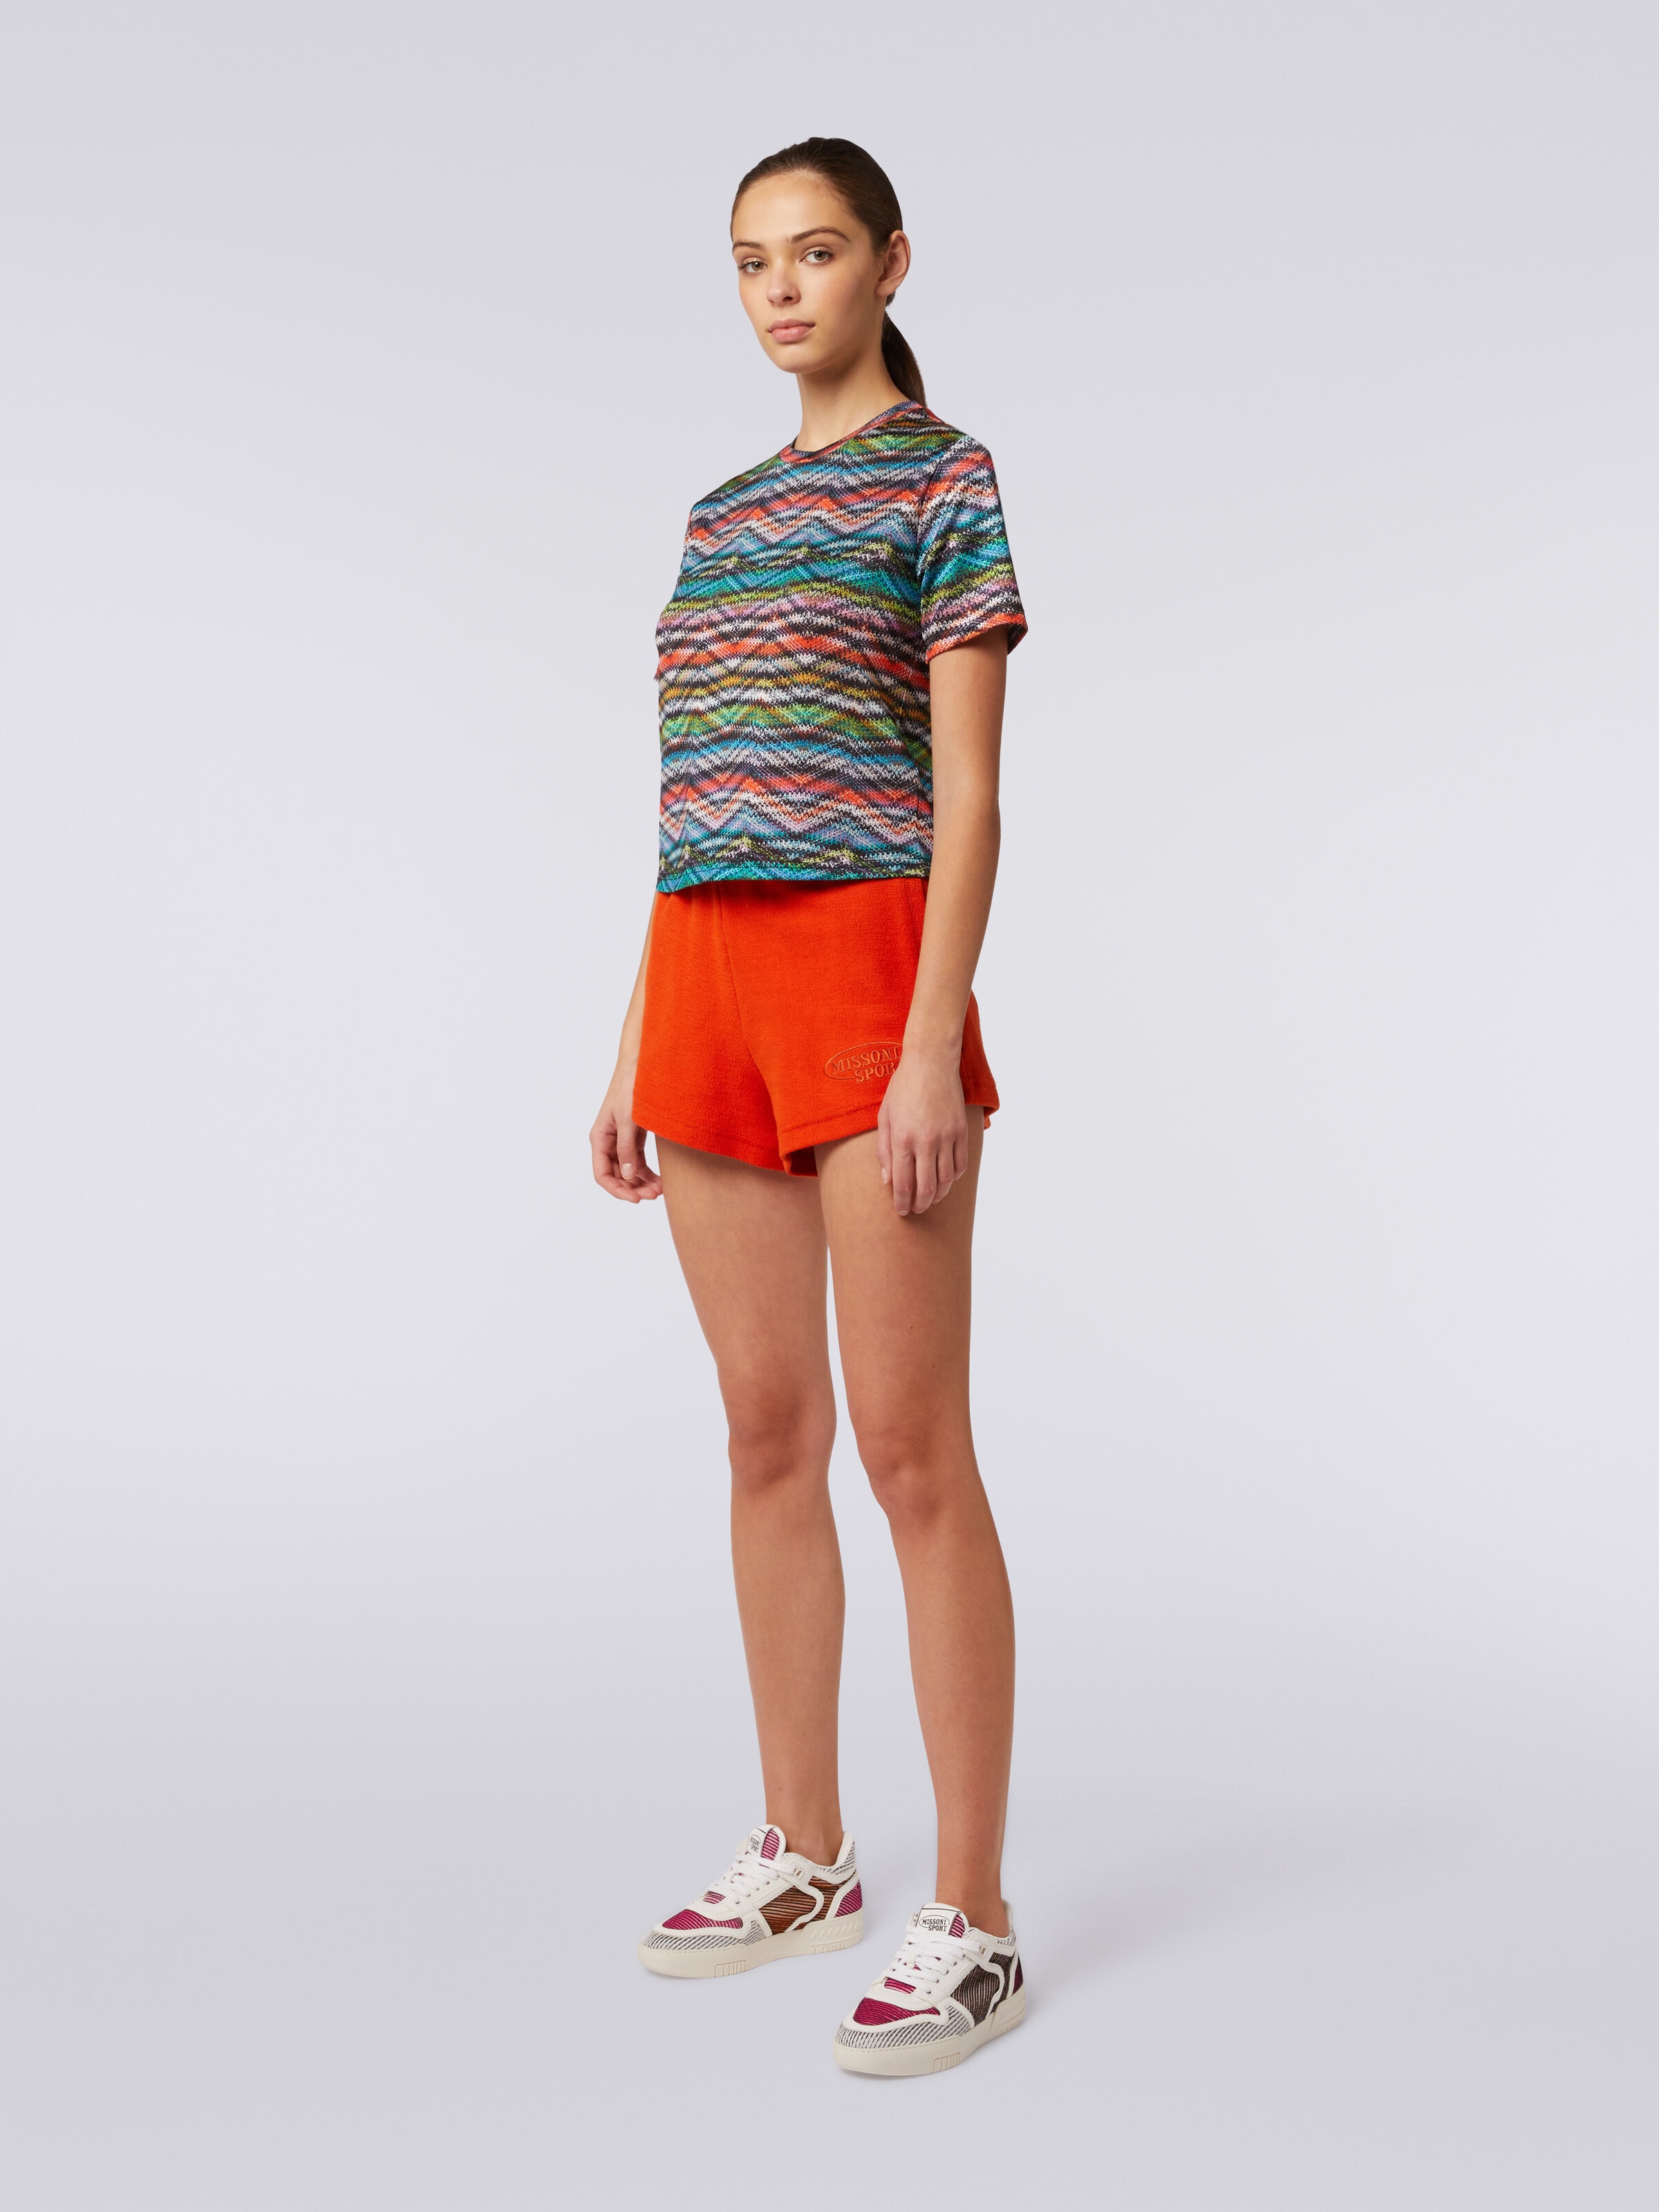 T-shirt in printed stretch nylon, Multicoloured  - 2